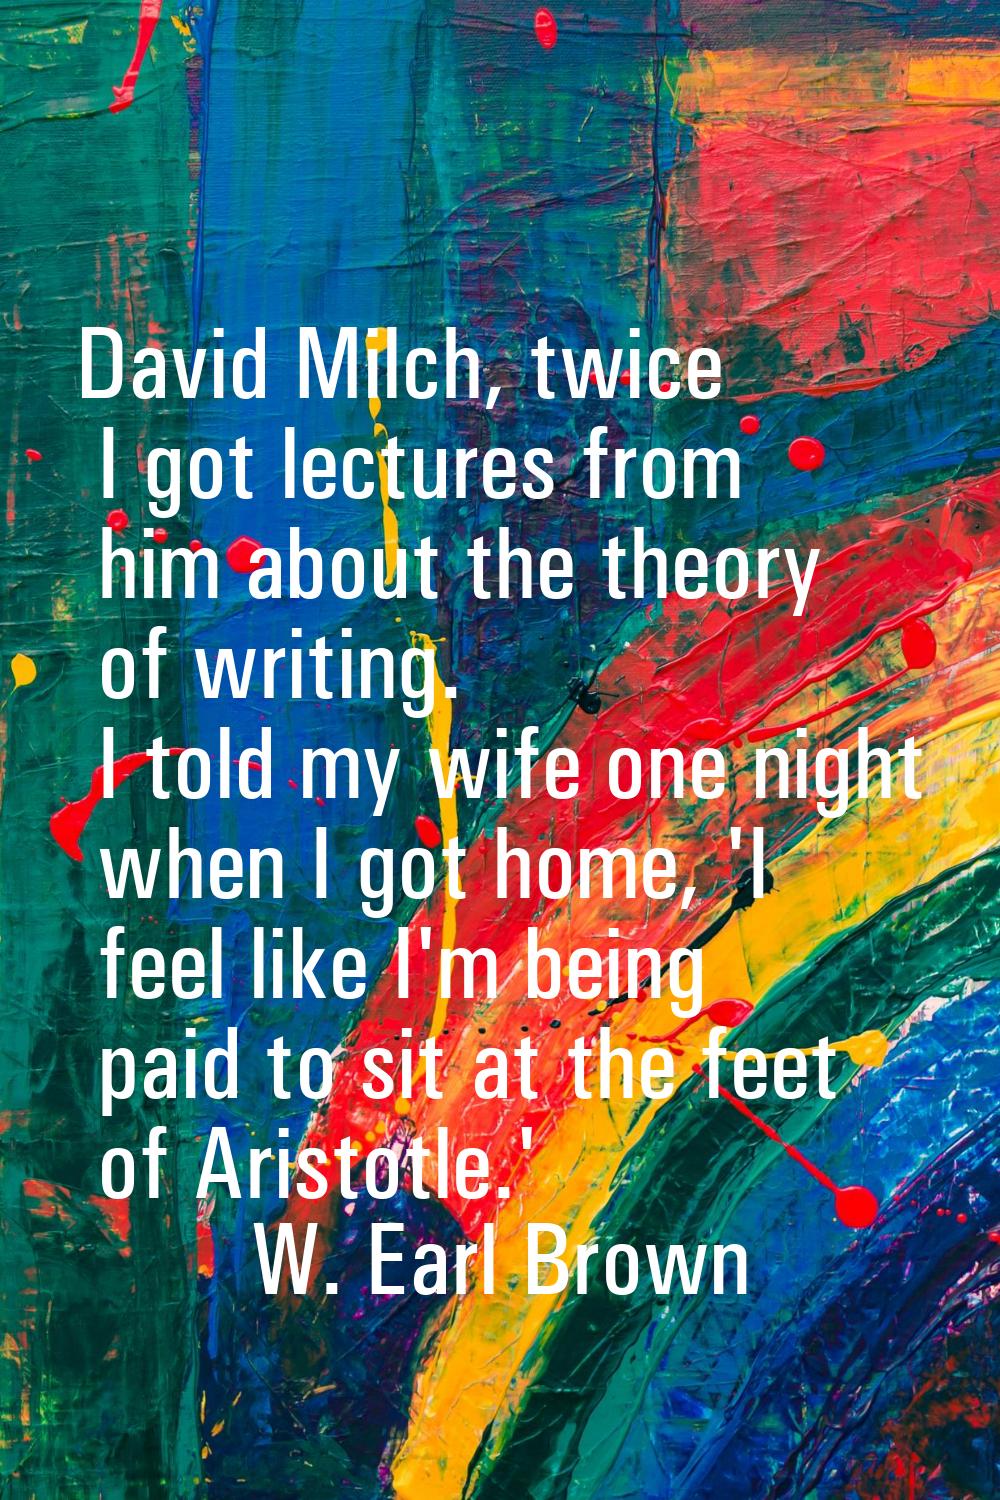 David Milch, twice I got lectures from him about the theory of writing. I told my wife one night wh